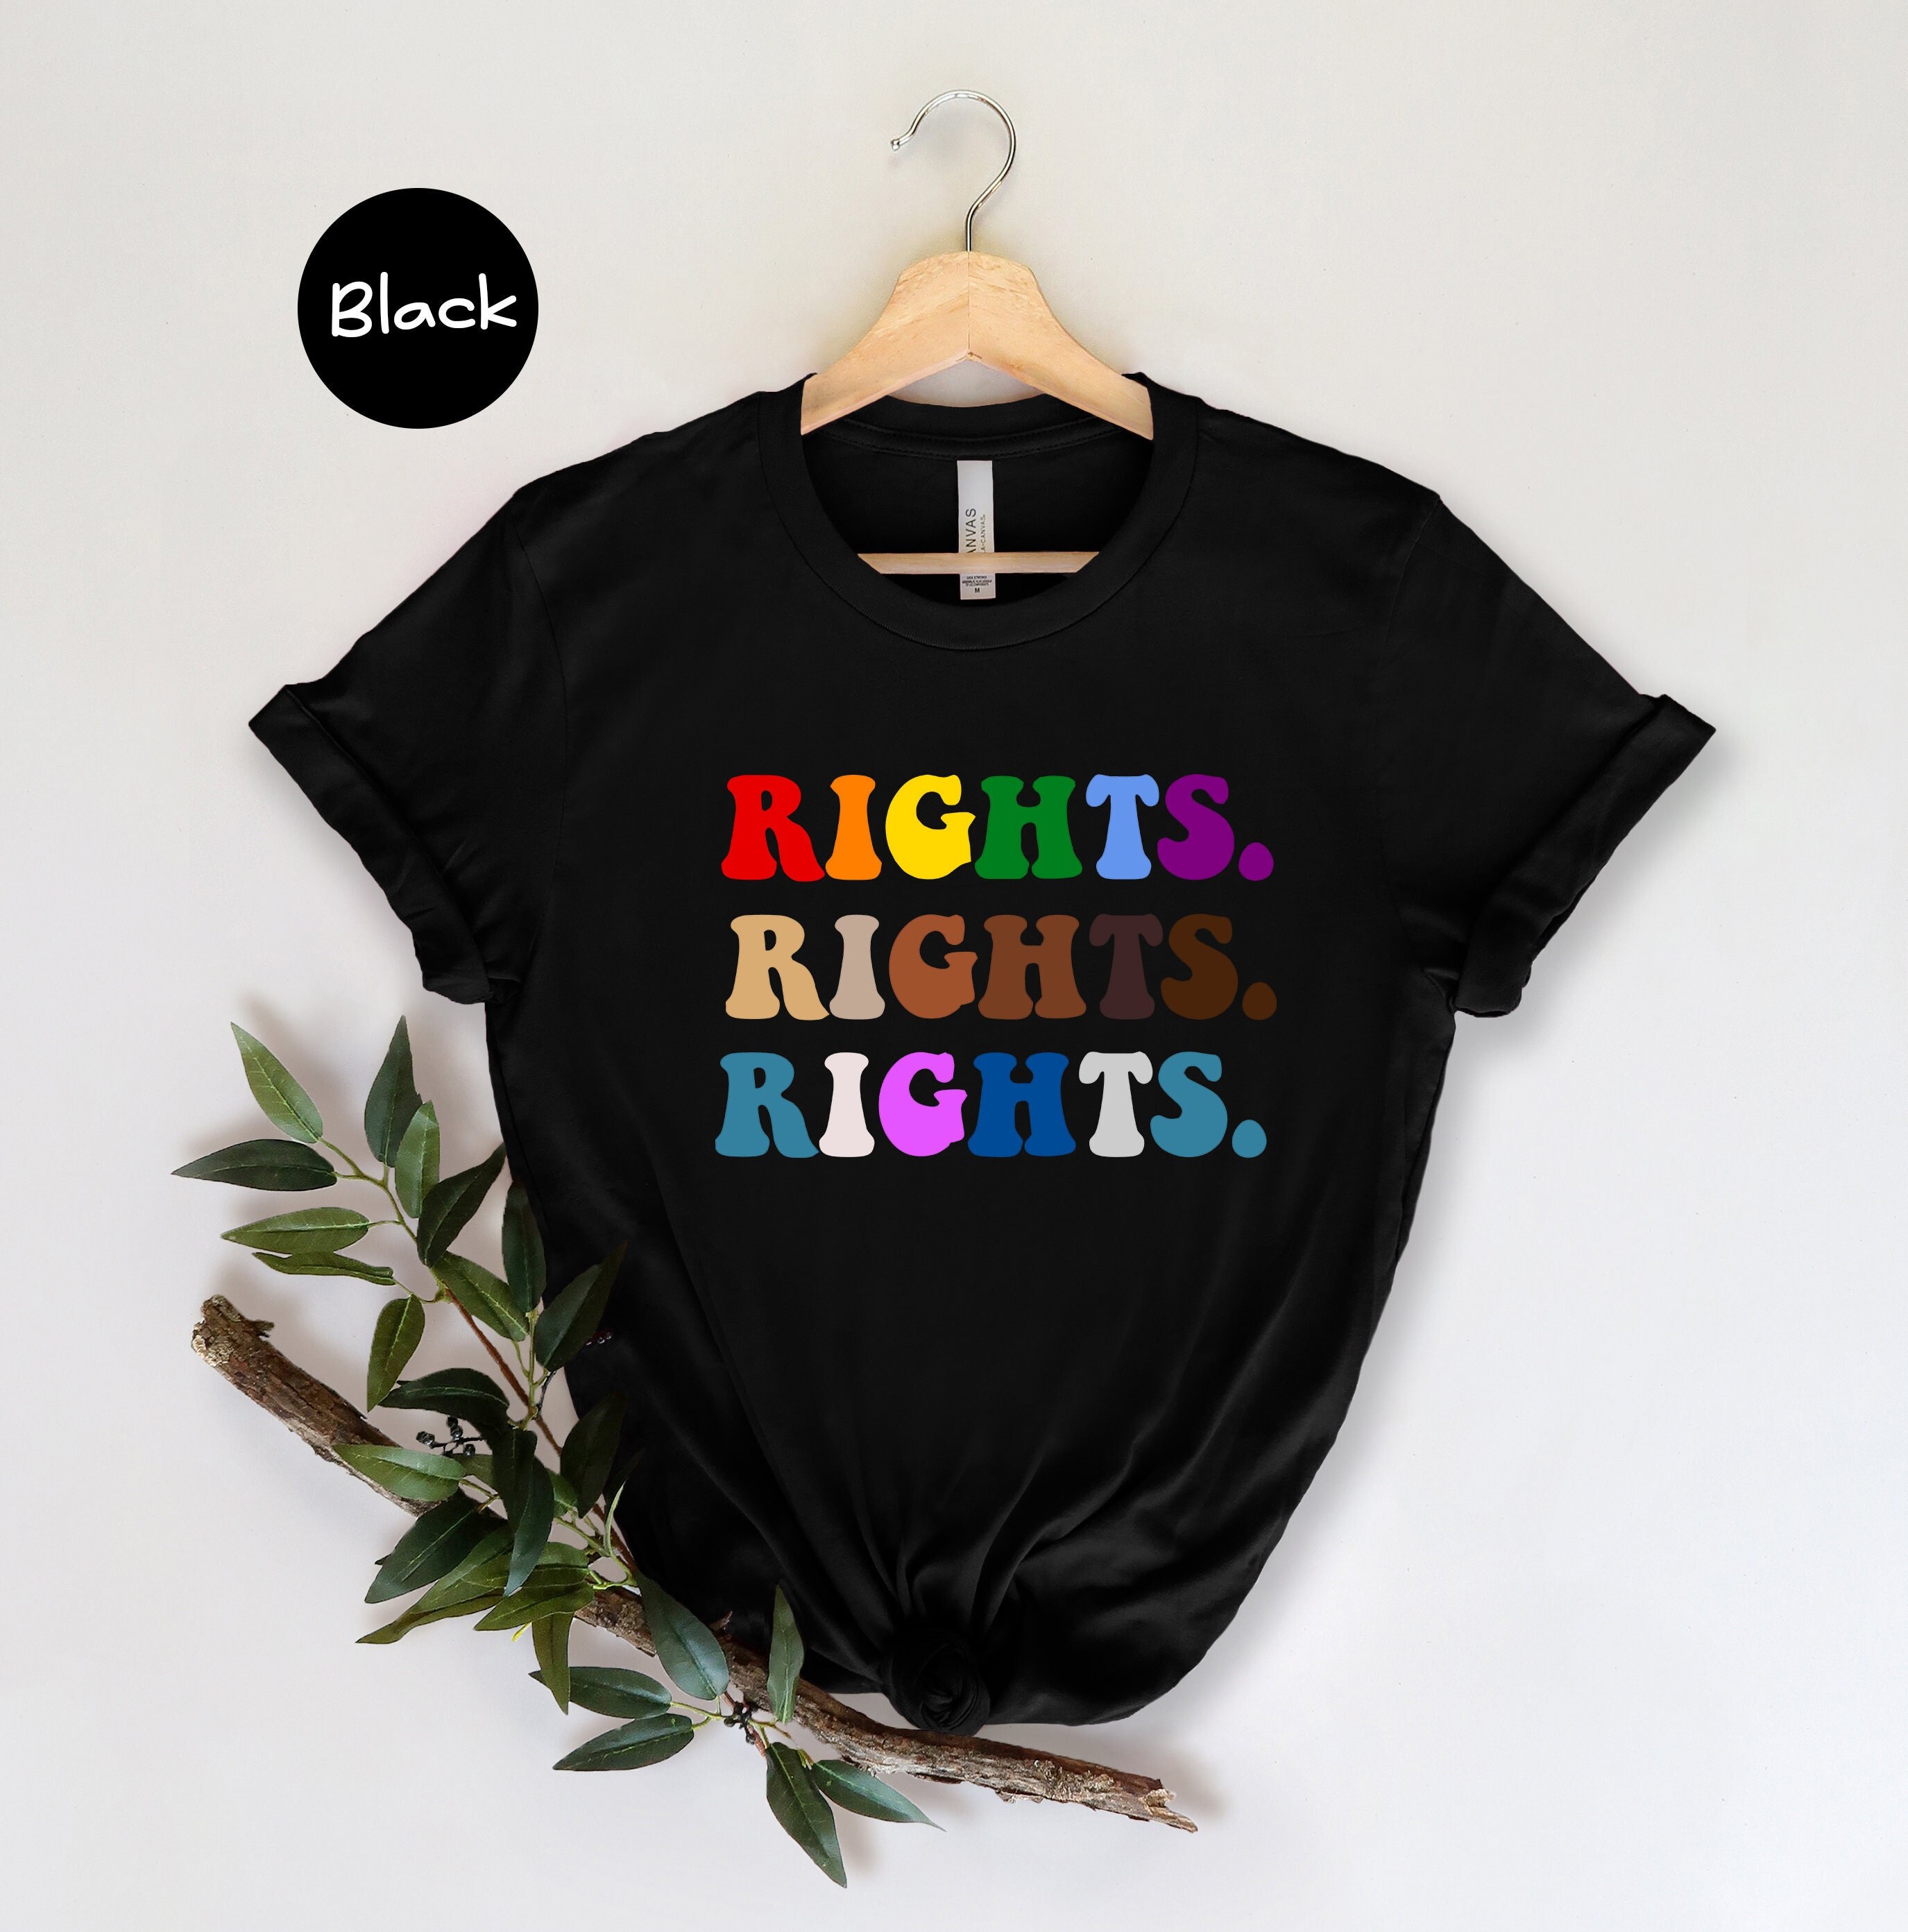 Discover Pride Rights BLM Rights-Lgbt Rights, Blm Shirt, Pride Shirt, Lgbt Shirt, Lgbtq Shirt, Pride T-Shirt, Lgbt T-Shirt, Lesbian Shirt, Gay Shirt